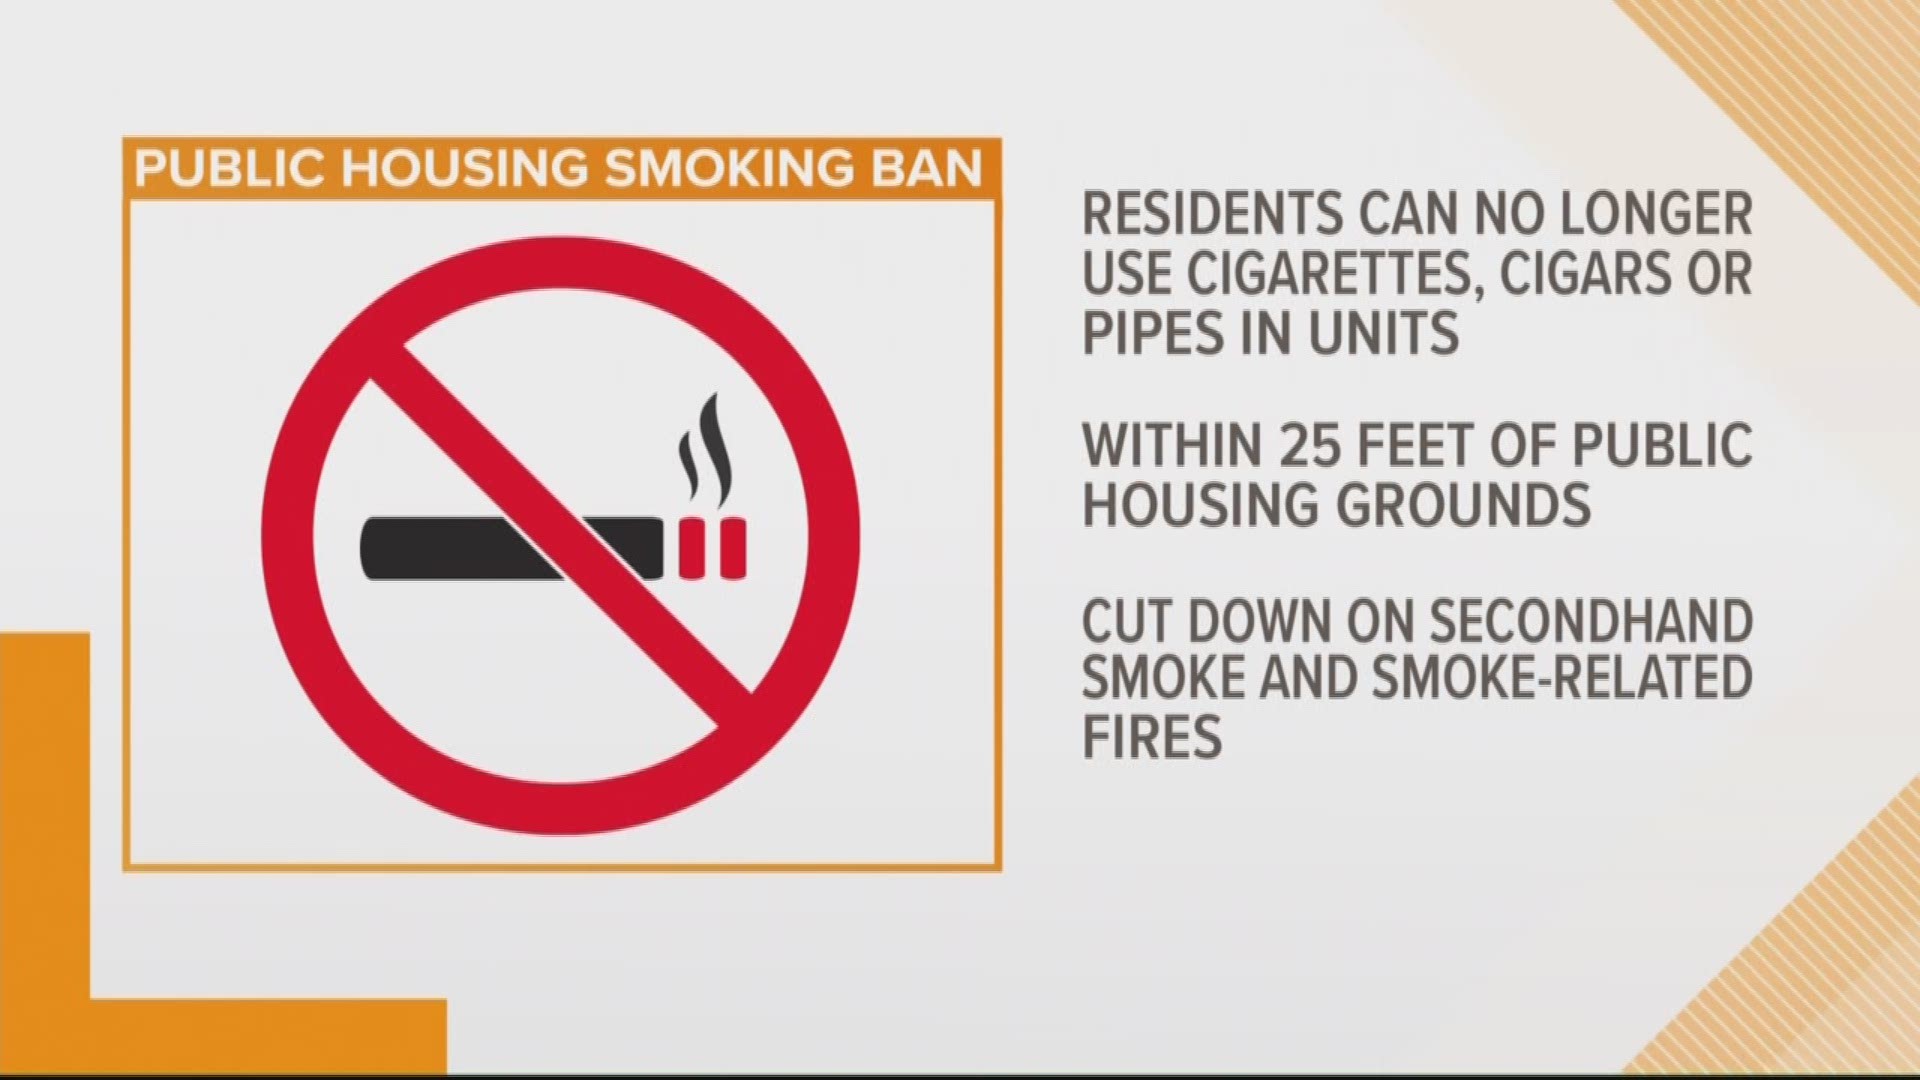 Starting Tuesday, public housing residents can no longer smoke cigarettes, cigars or pipes in units. The ban is meant to cut down on secondhand smoke and smoke-related fires.